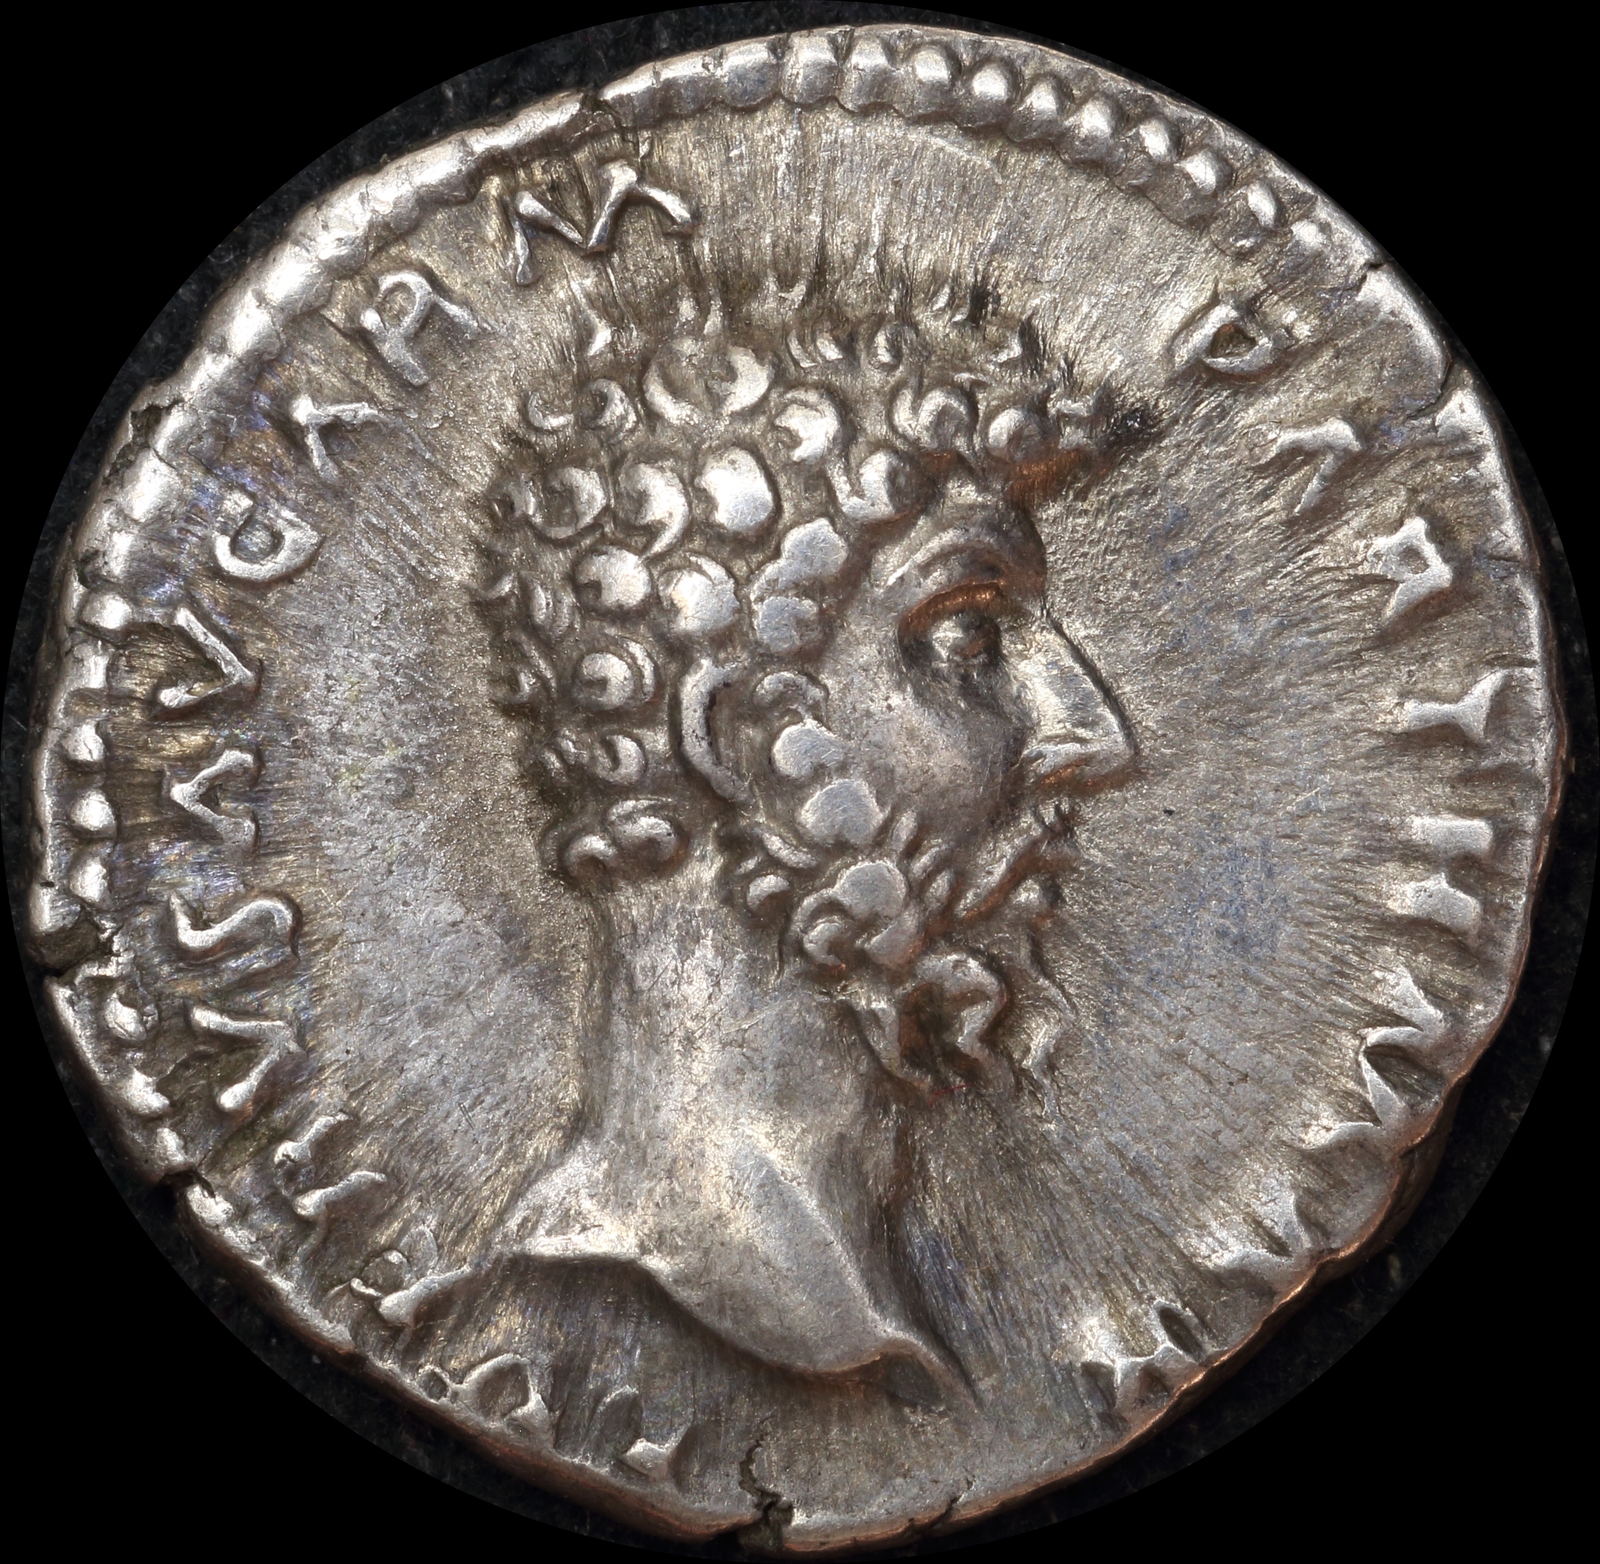 Ancient Rome (Imperial) AD 166 Lucius Verus Silver Denarius Victory RIC III # 566 about EF product image